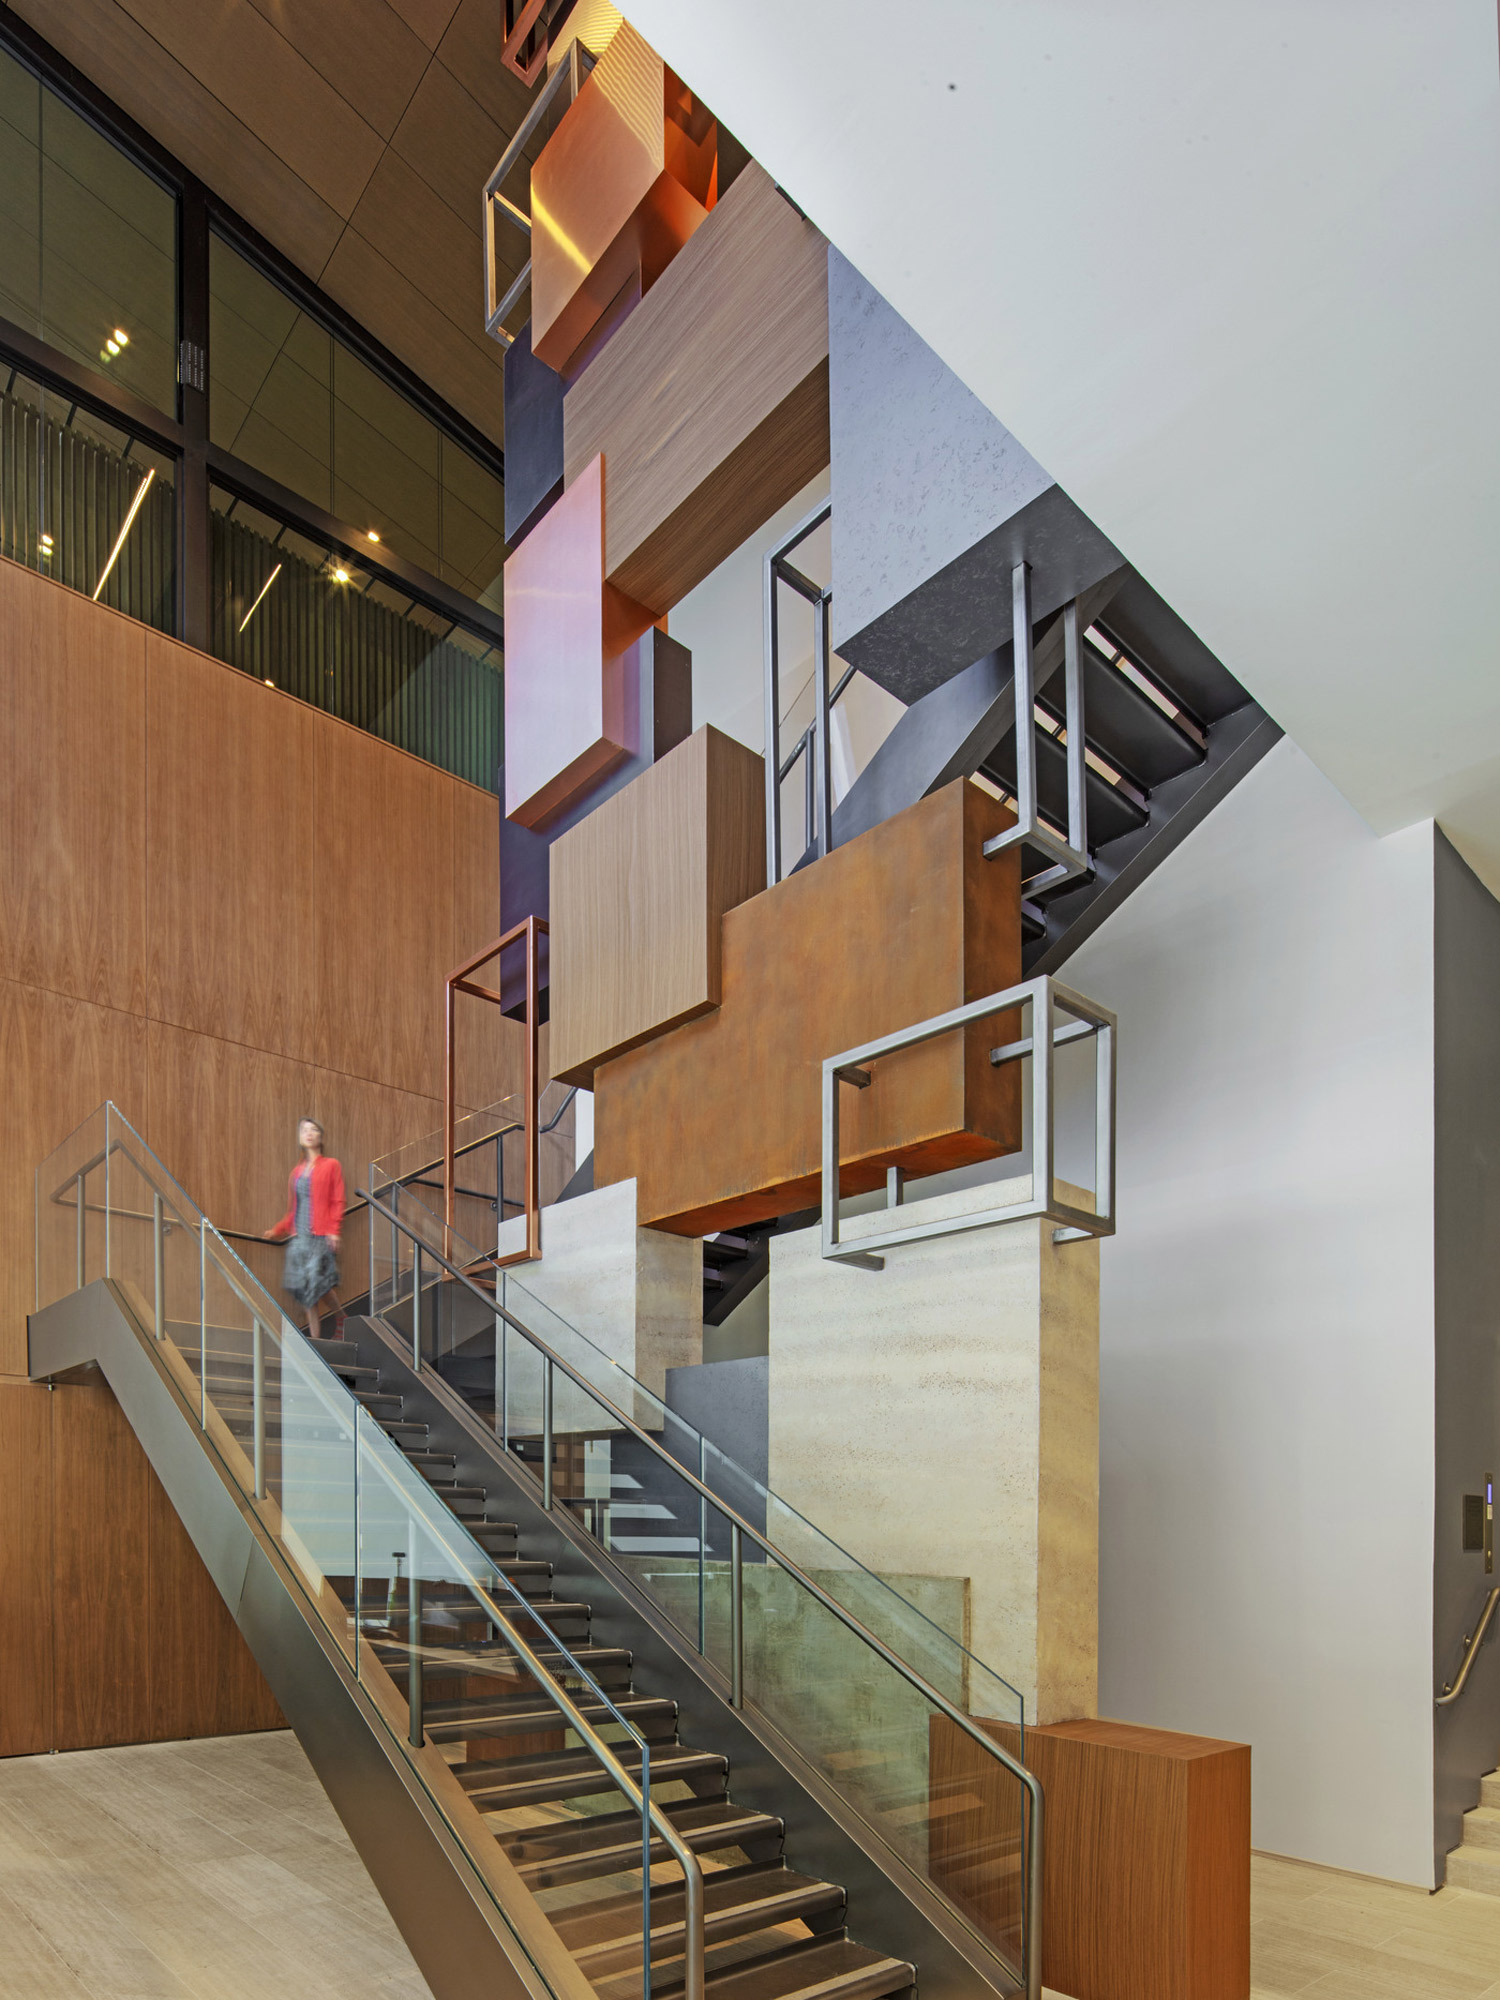 Modern staircase intersects warm wooden panels and a large abstract painting, accented by geometric pendant lights and glass balustrades, providing an engaging vertical flow within a contemporary space.